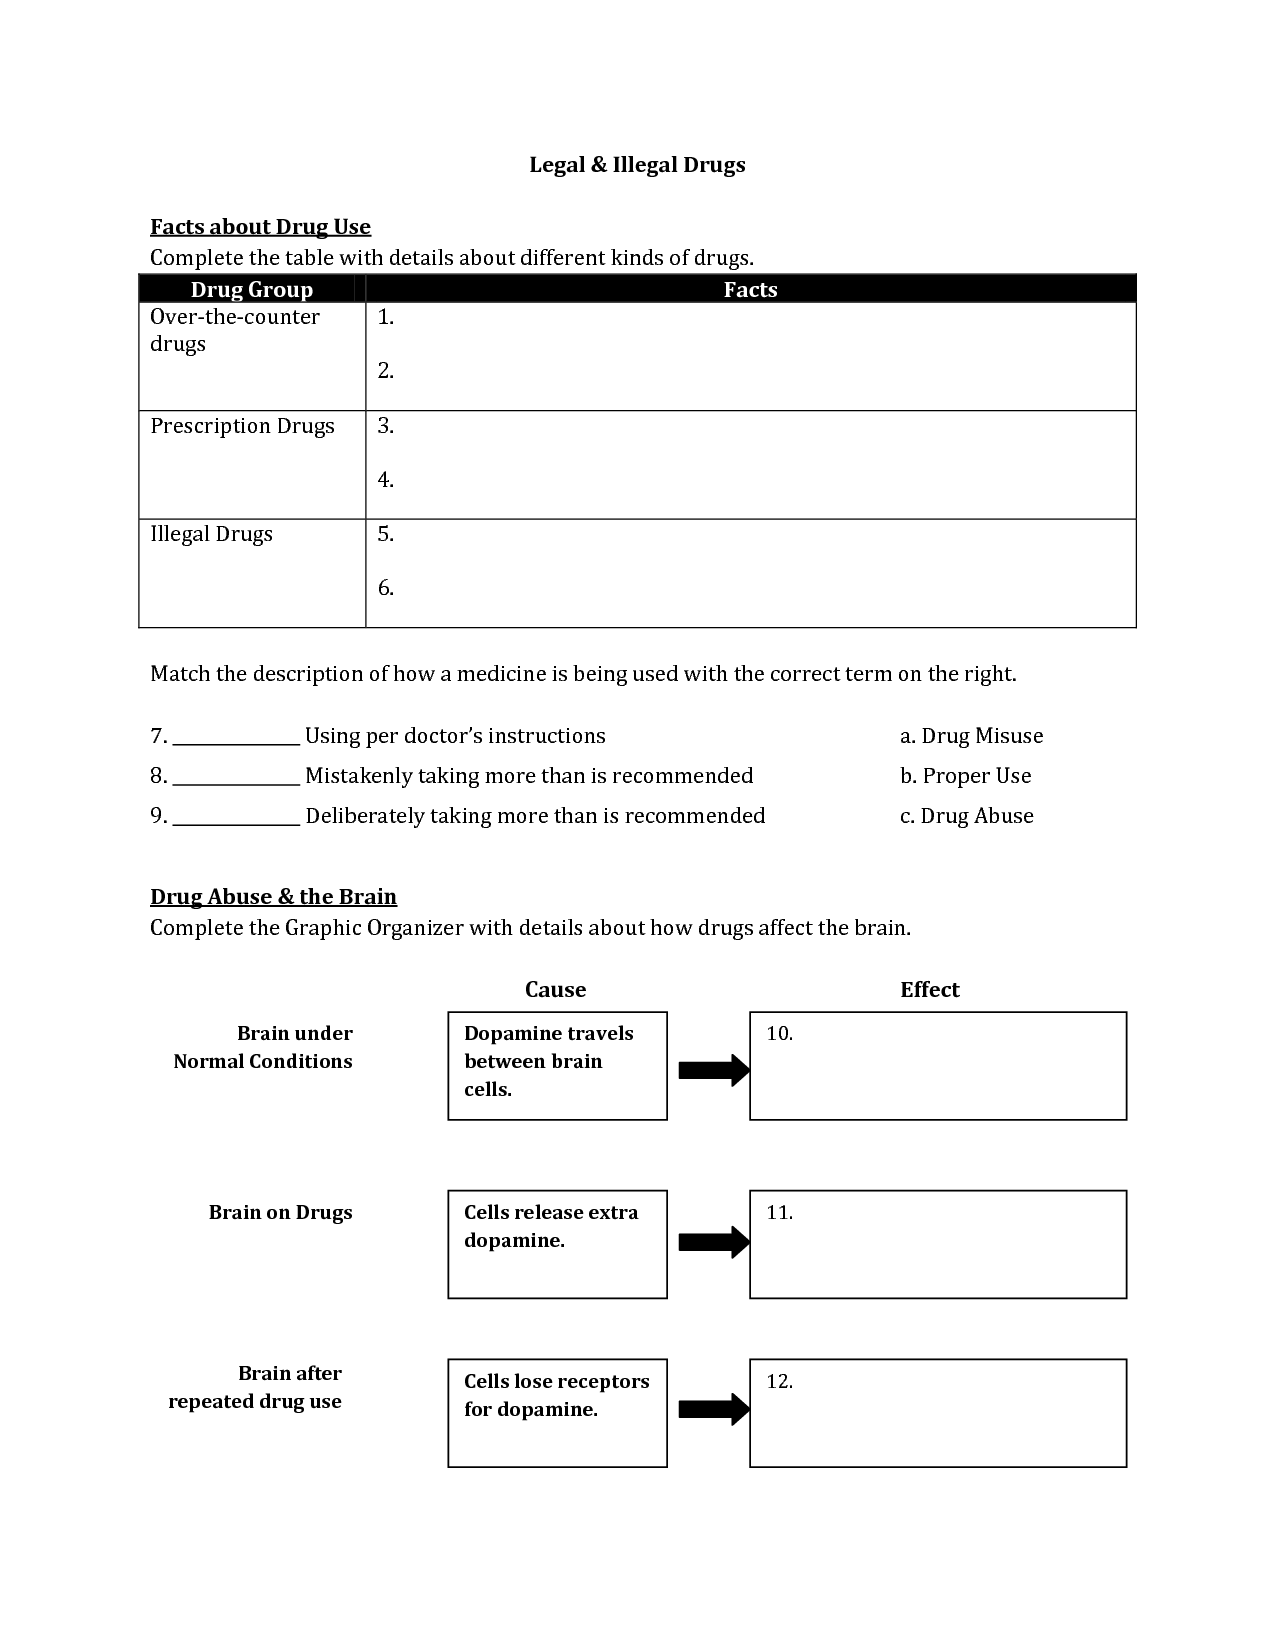 10-best-images-of-addiction-group-worksheets-drug-addiction-recovery